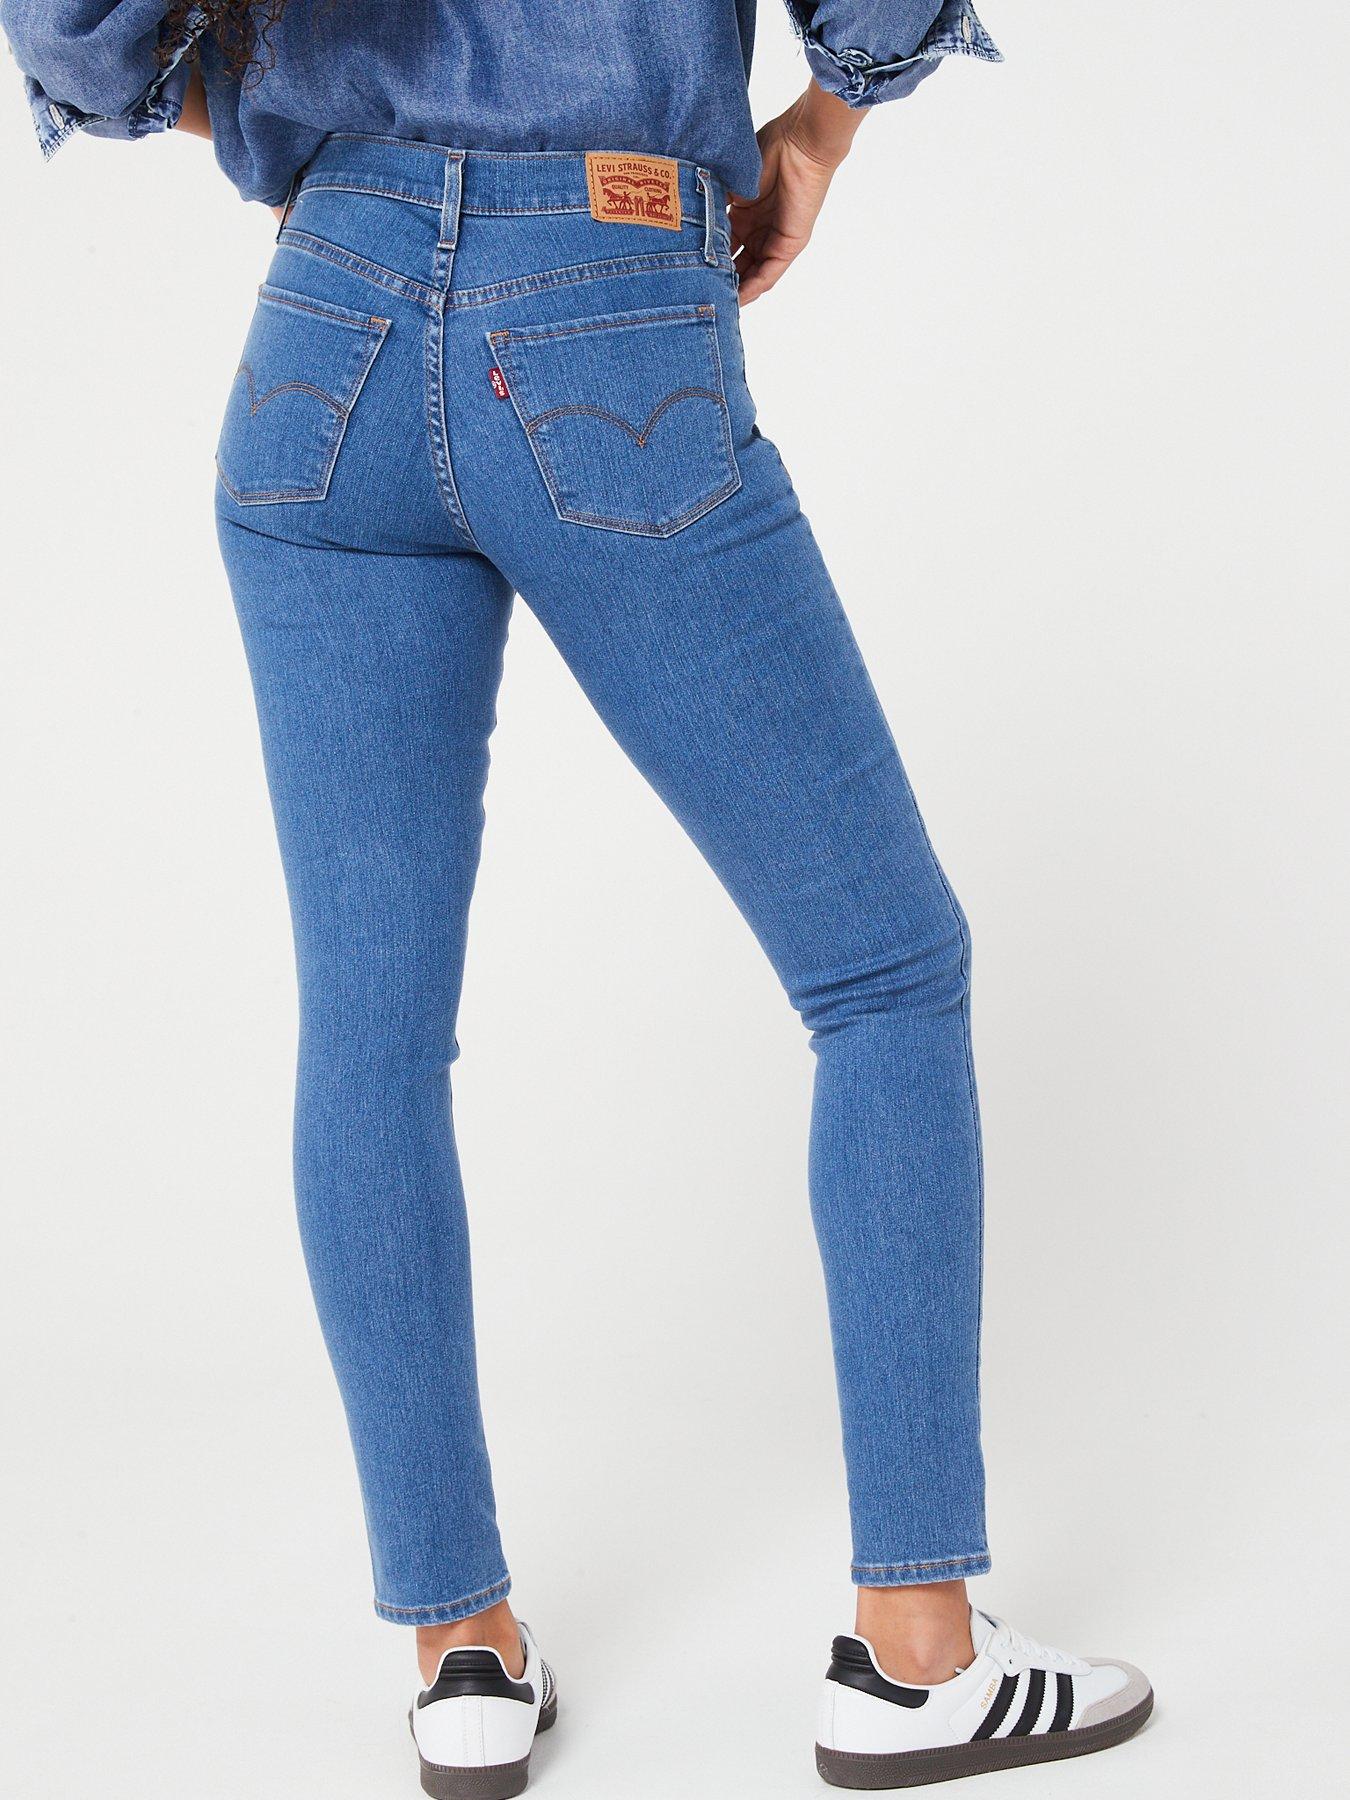 311™ Shaping Skinny Jeans - We Have Arrived Blue